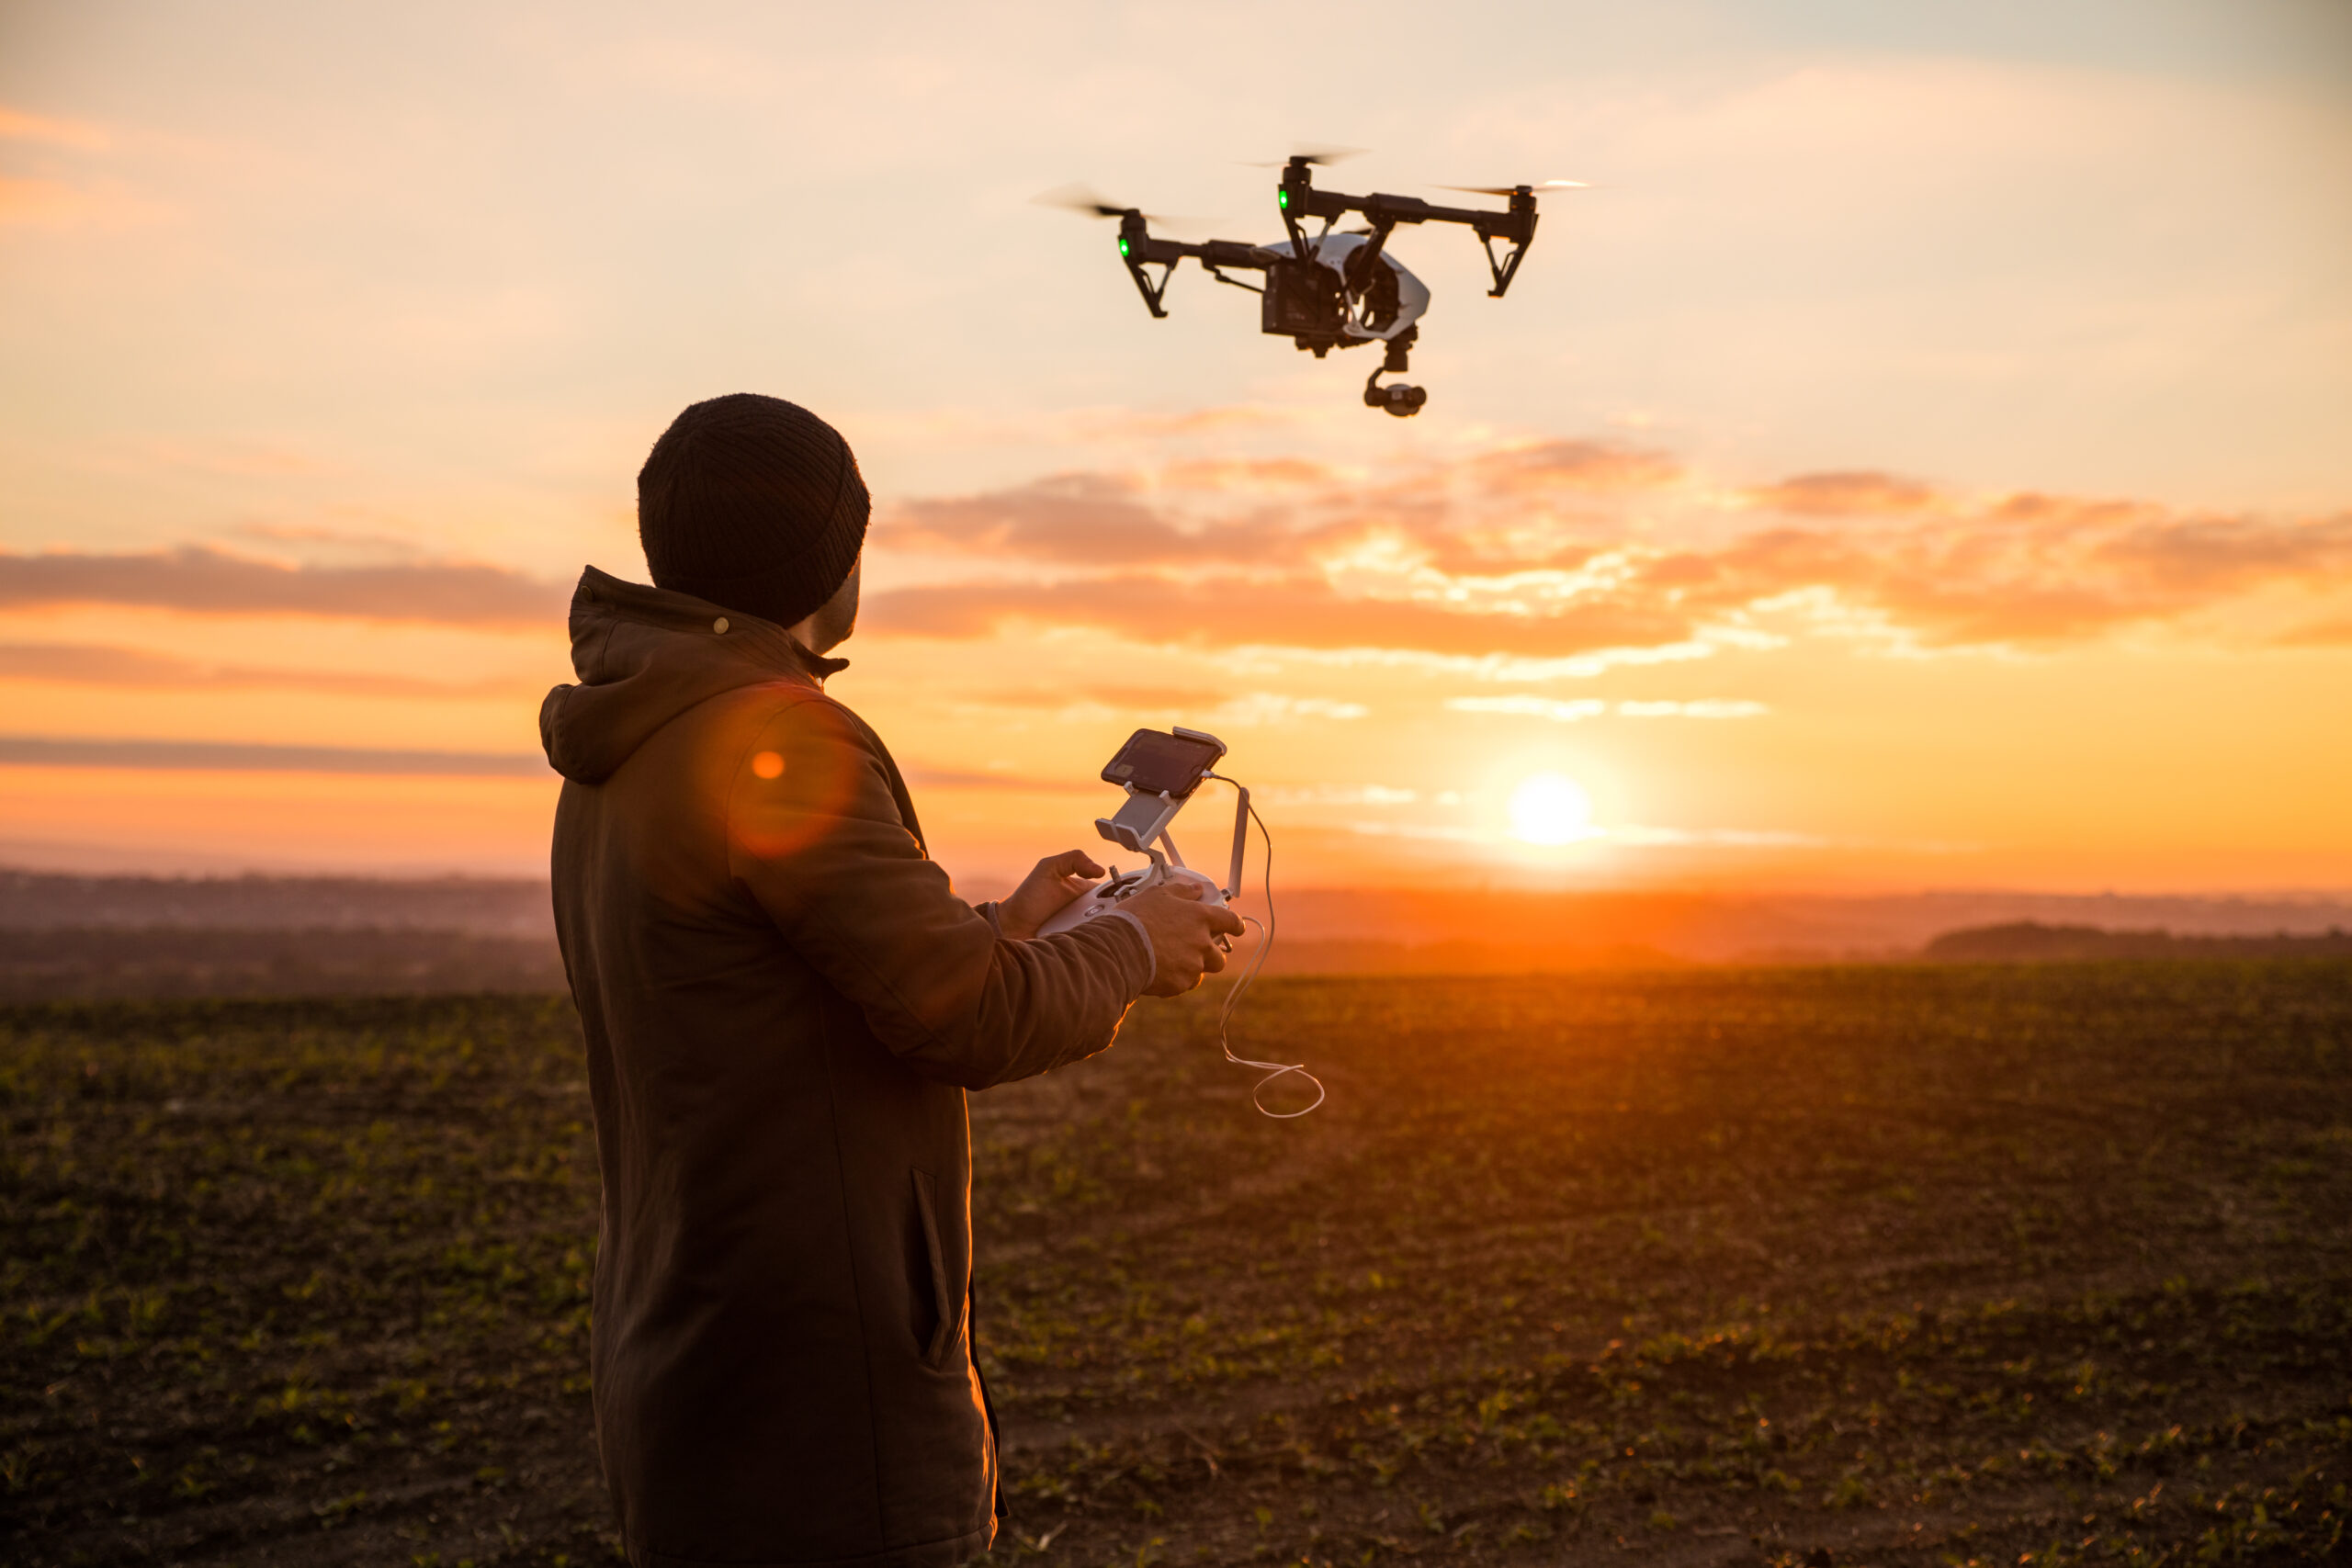 Man operating a drone;